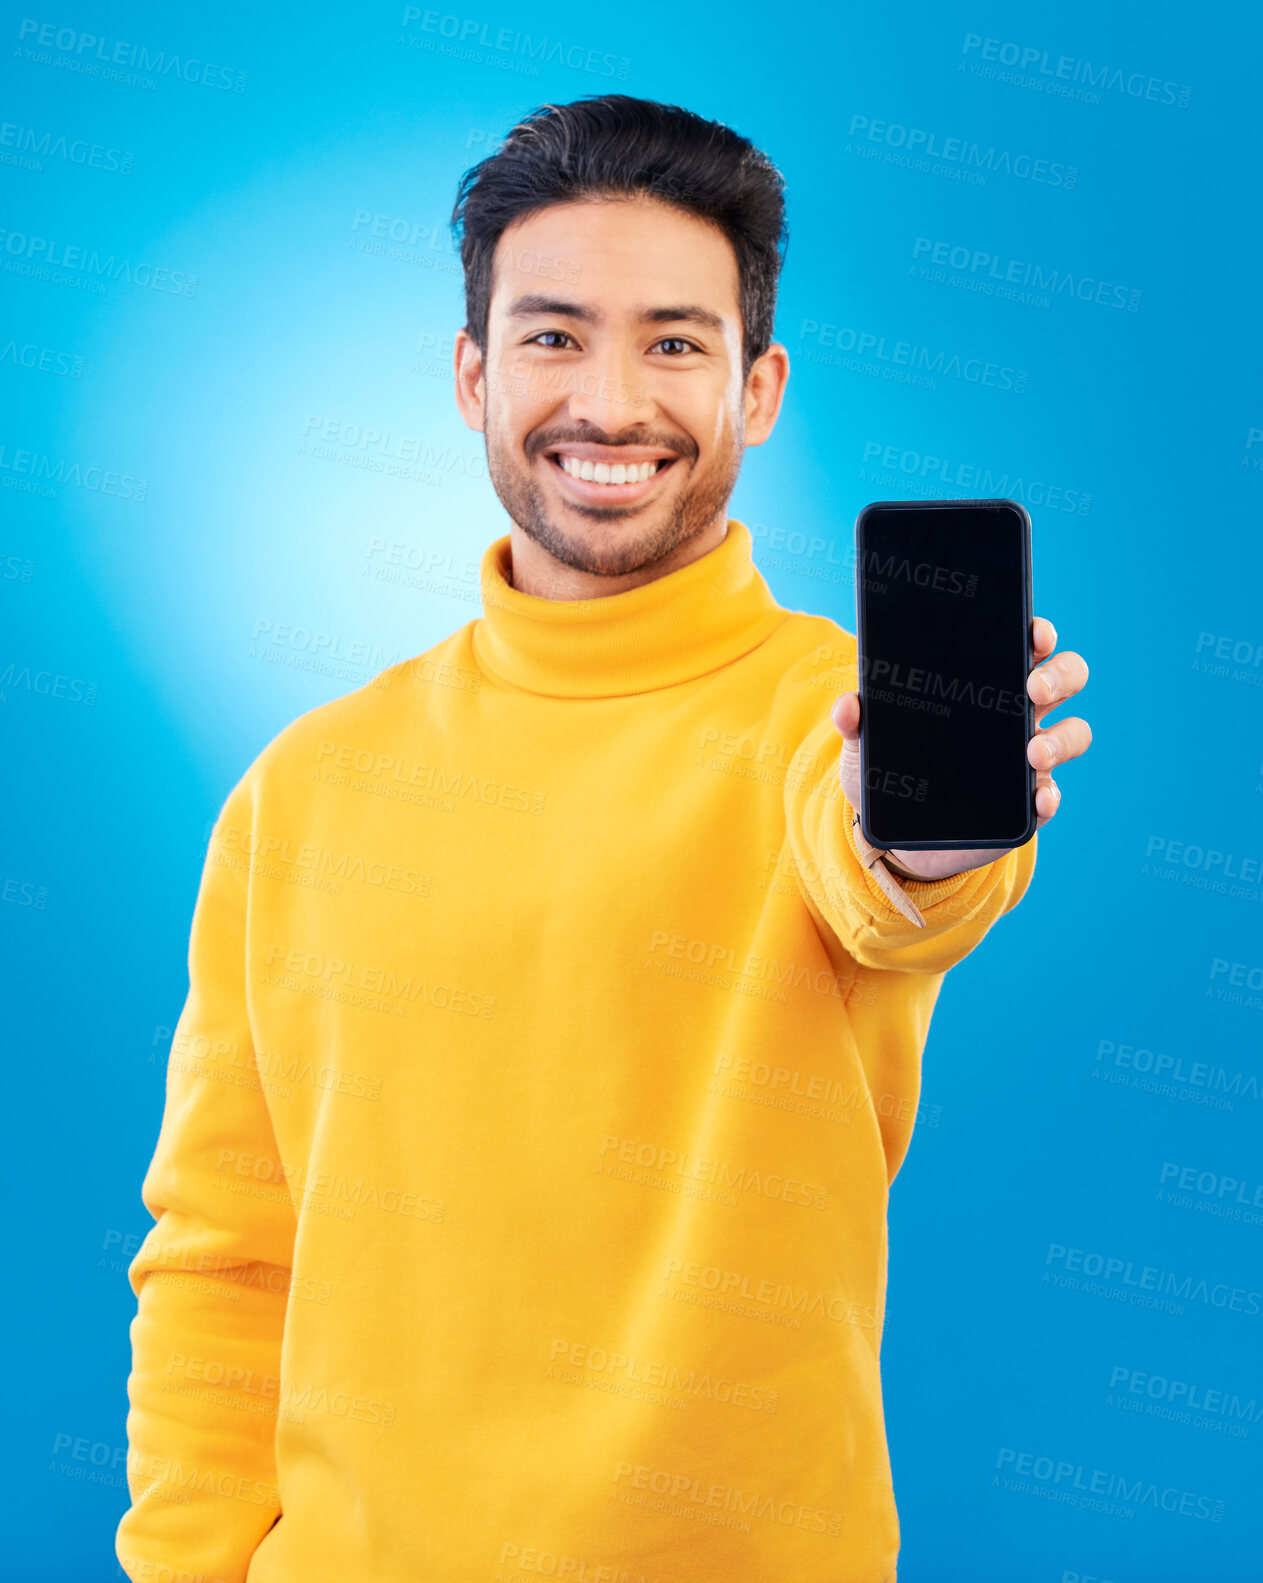 Buy stock photo Advertising, portrait of man with smartphone and in blue background happy for social networking. Online communication, technology or marketing, branding and male person with cellphone app in studio